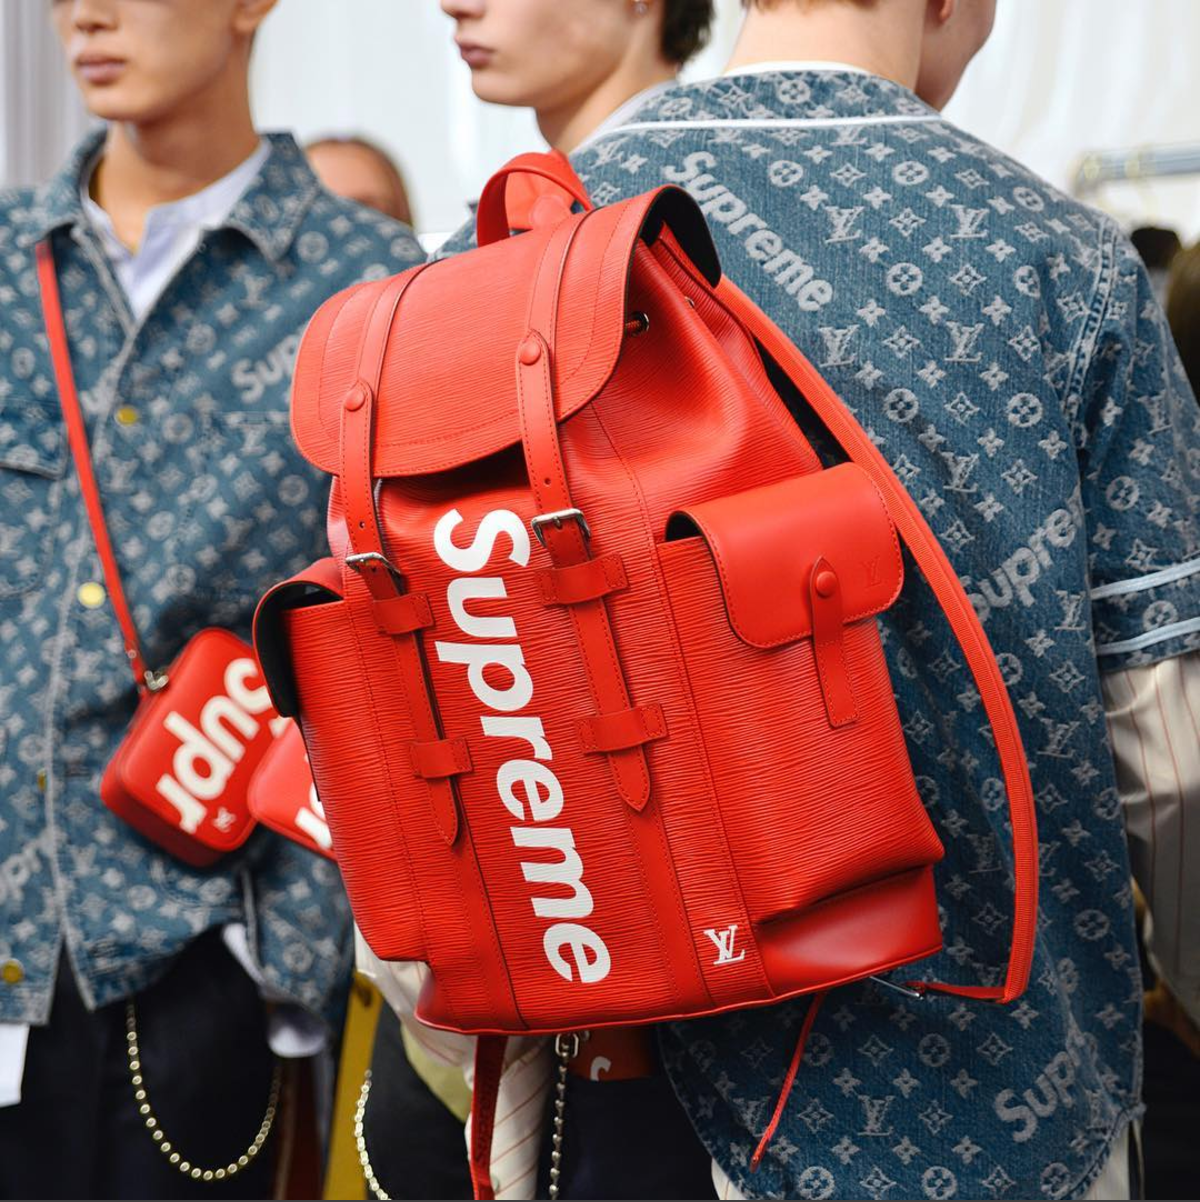 Supreme Was Not Bought By LVMH For $500 Million